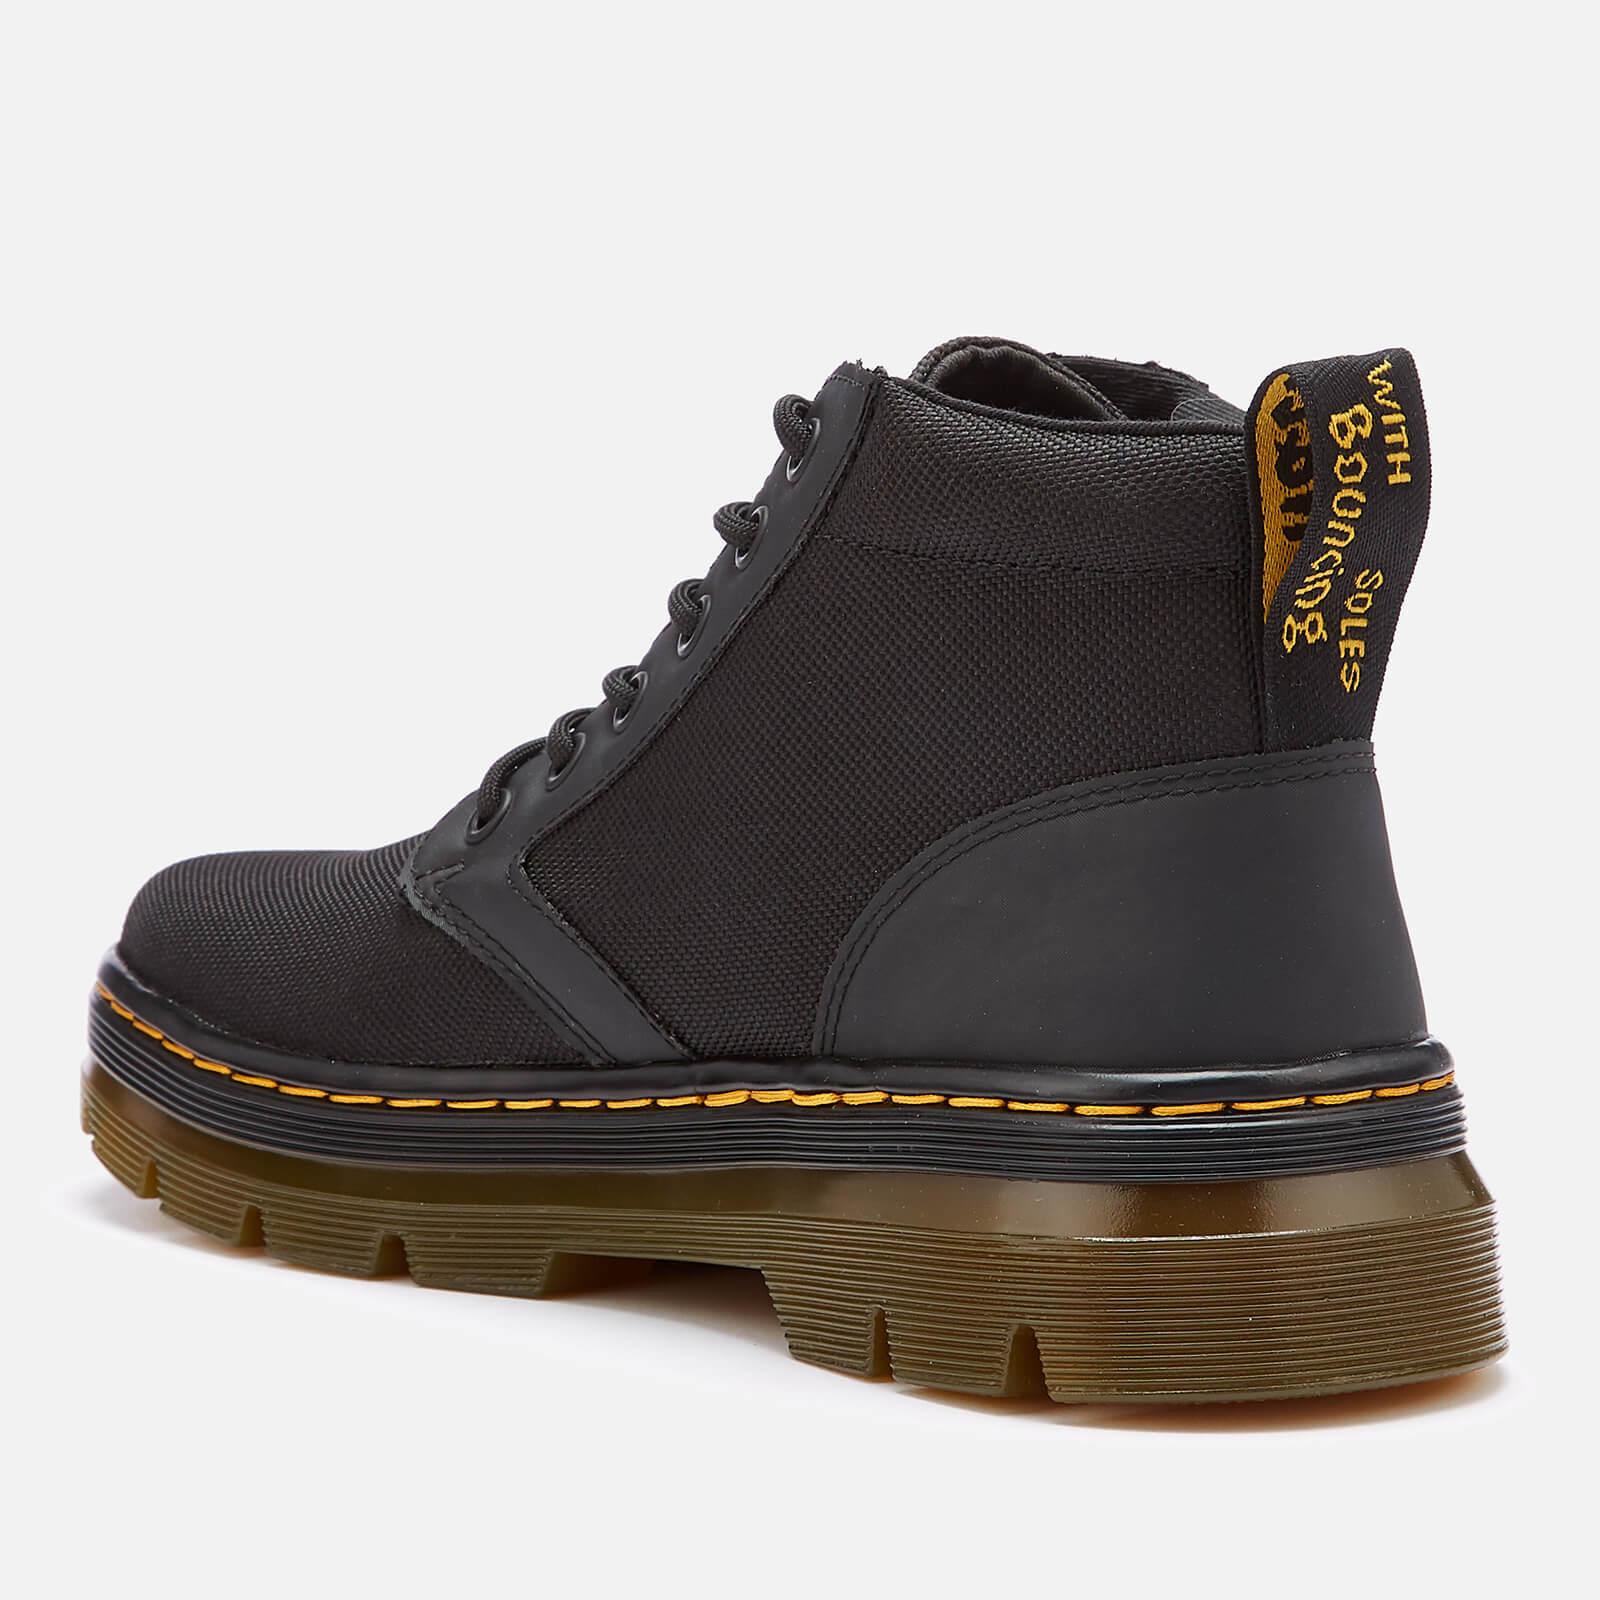 Dr. Martens Synthetic Bonny Chukka Boot in Black for Men - Save 67% - Lyst